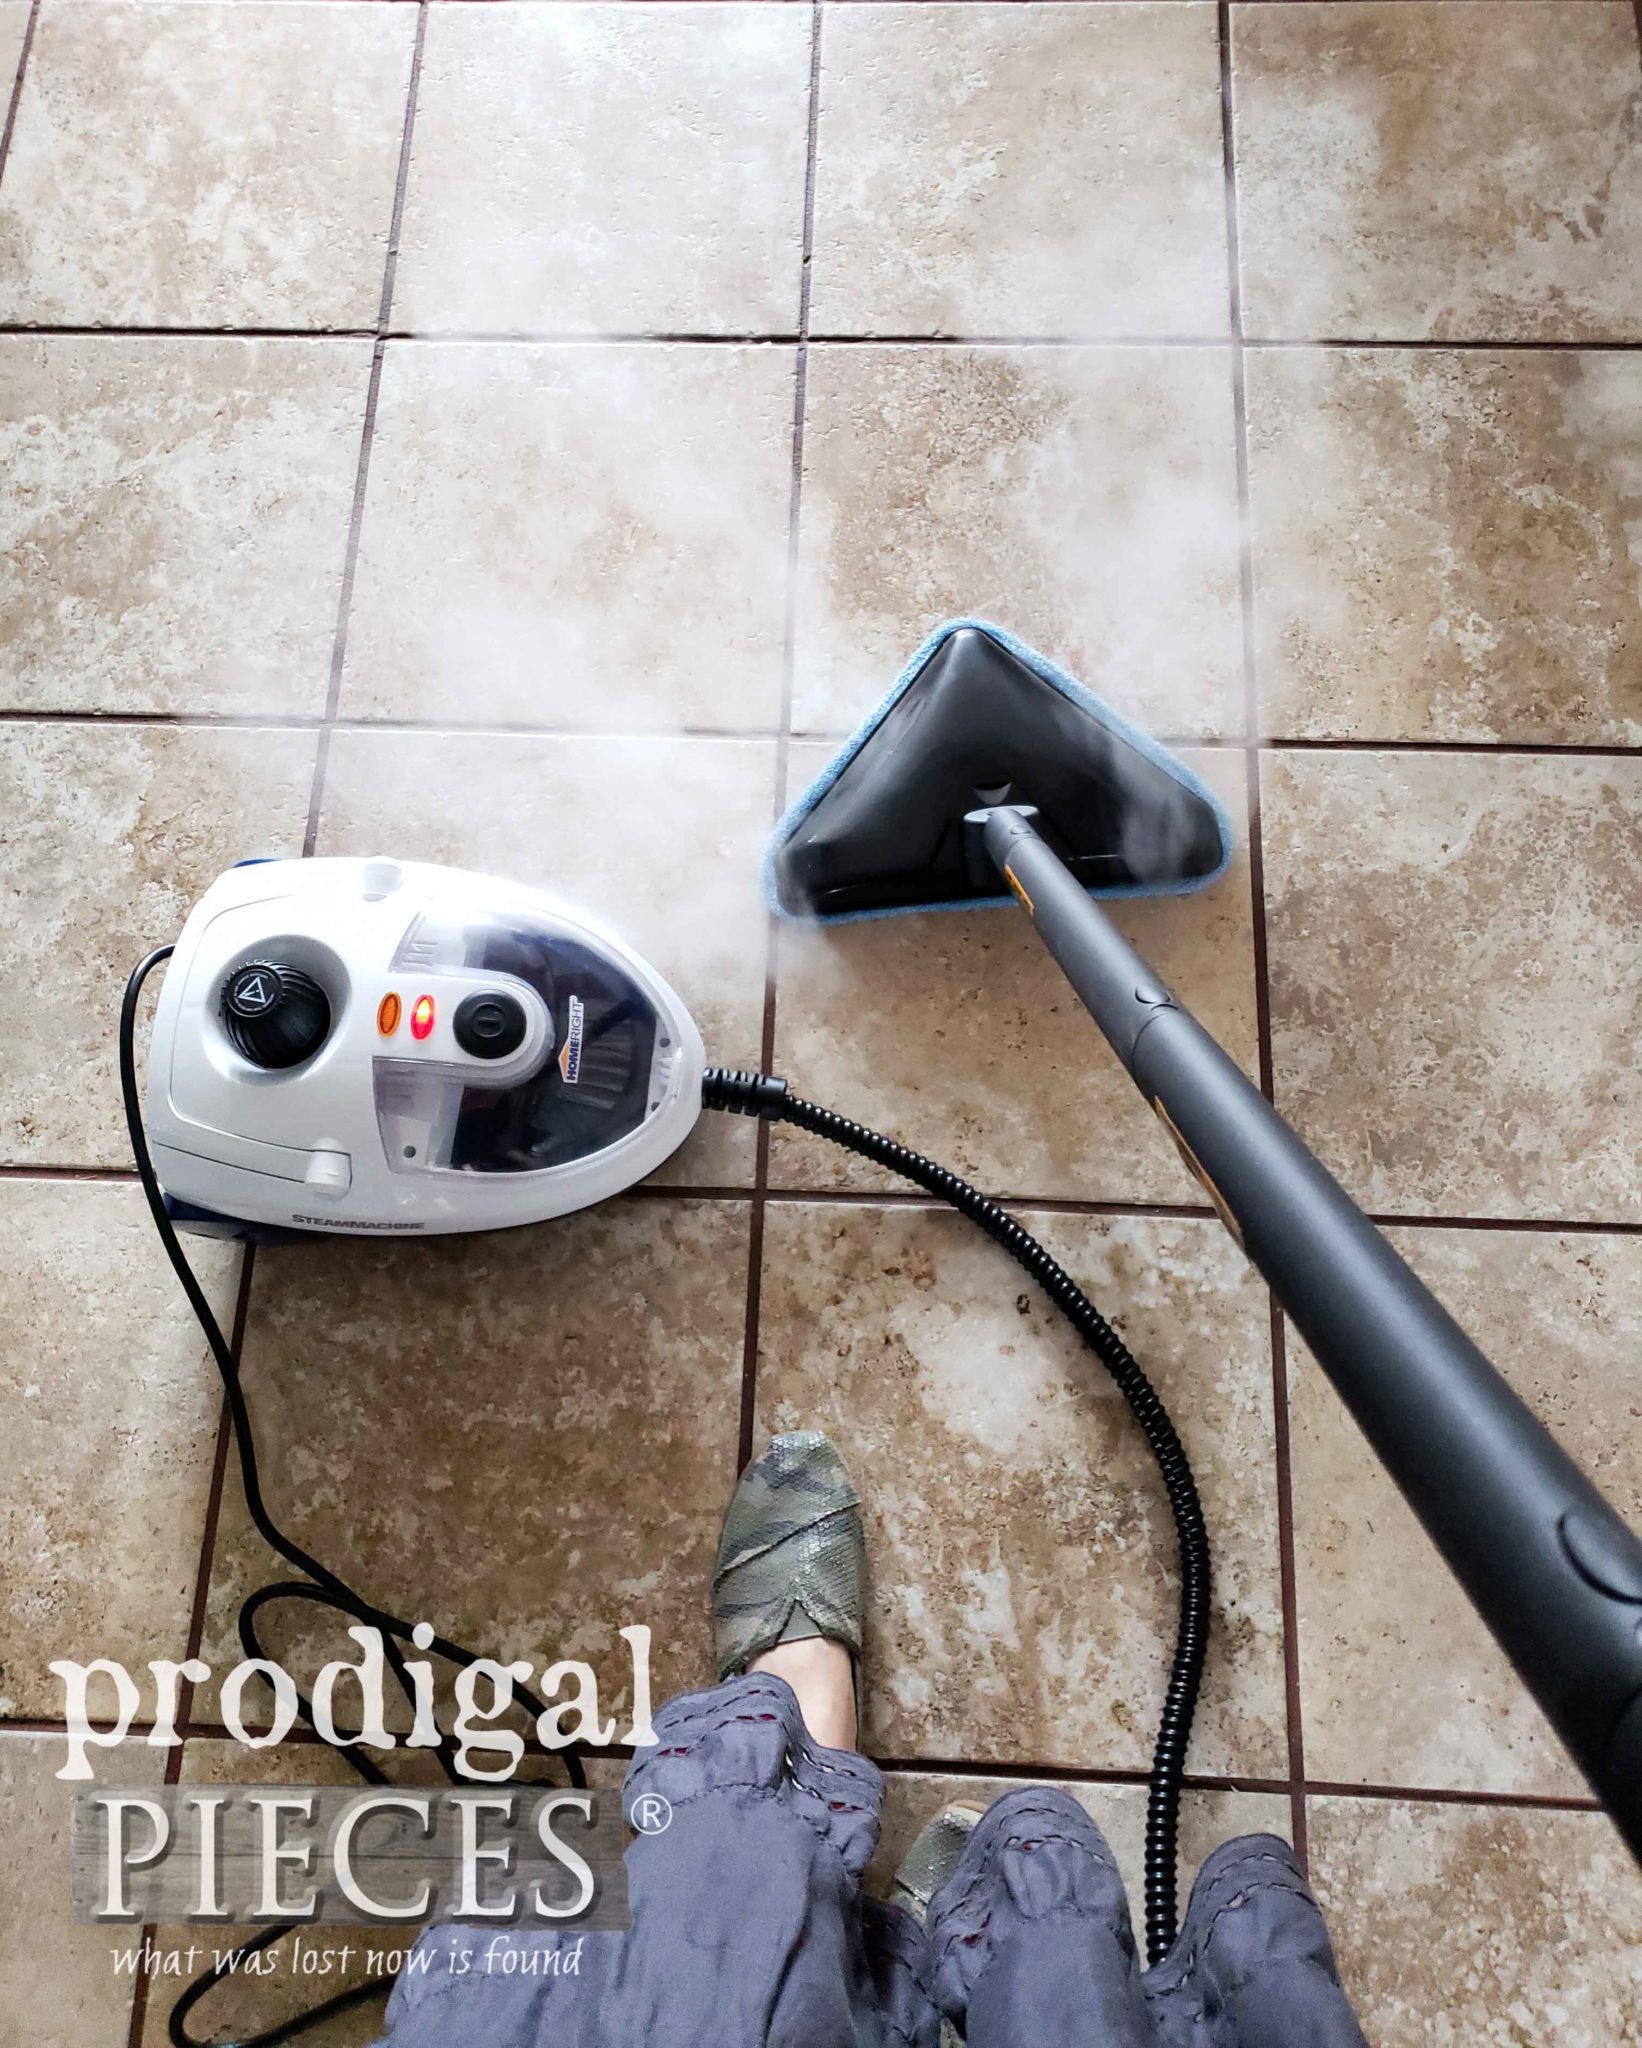 Steam Cleaning Tile Floor and Grout with HomeRight SteamMachine Elite | prodigalpieces.com